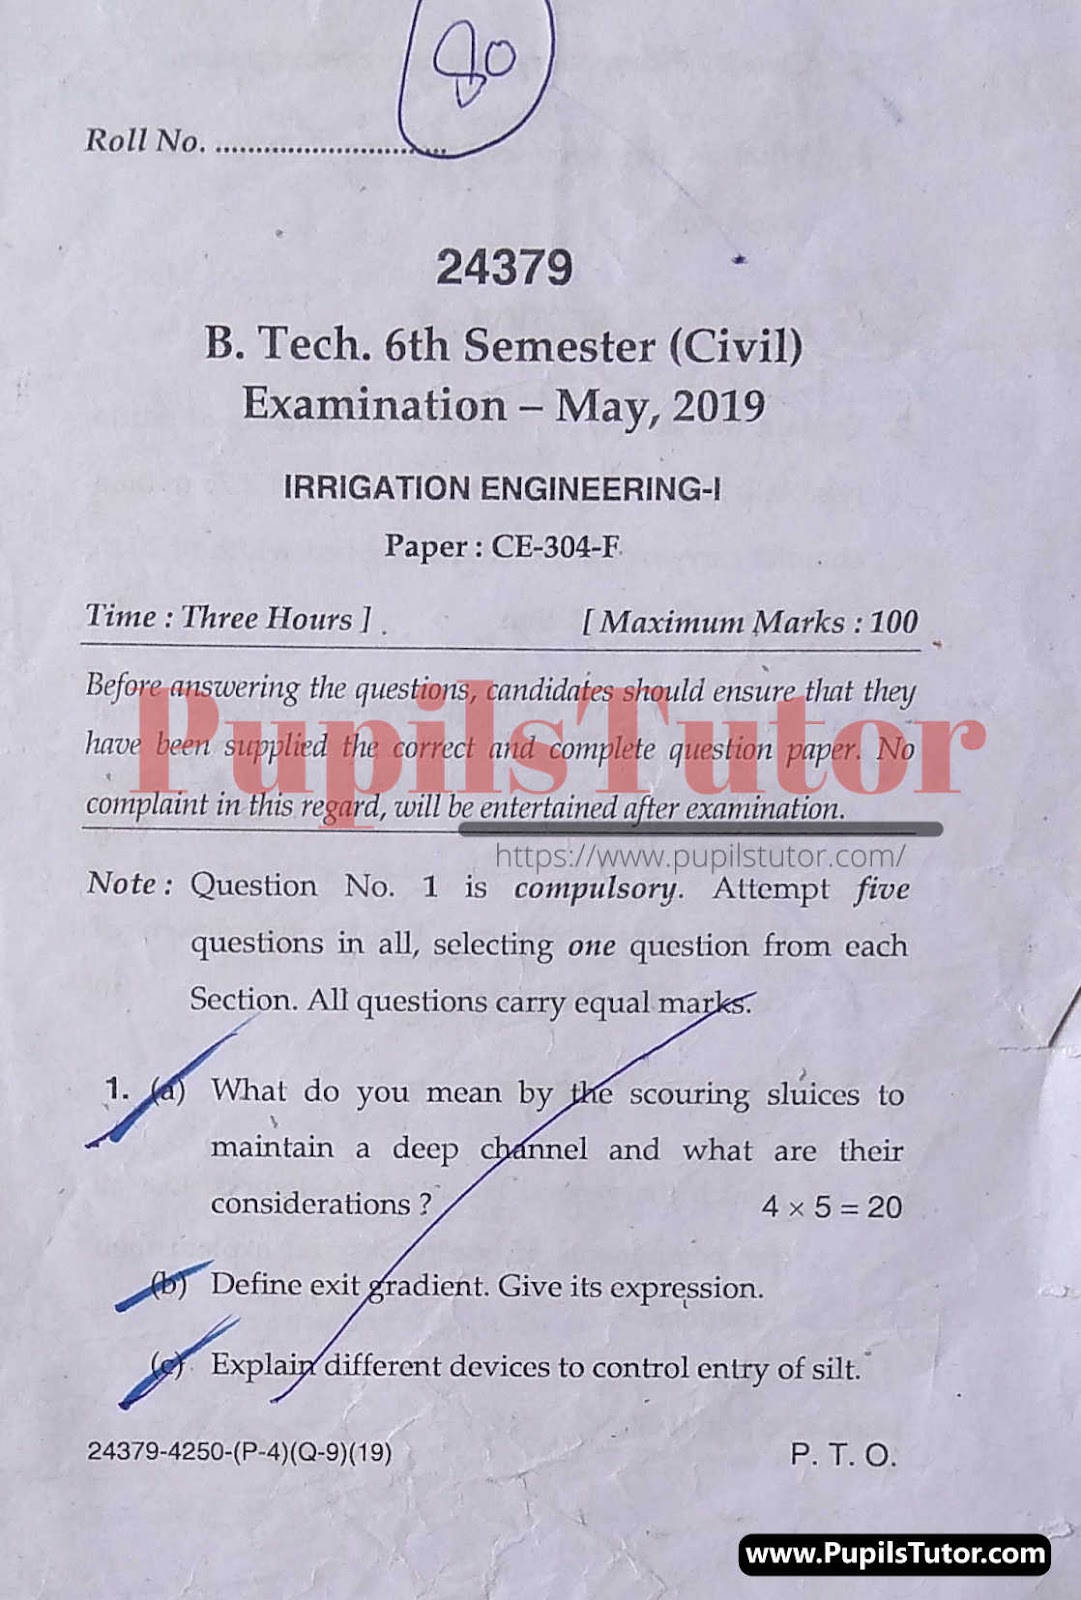 MDU (Maharshi Dayanand University, Rohtak Haryana) Btech Regular Exam Sixth Semester Previous Year Irrigation Engineering Question Paper For May, 2019 Exam (Question Paper Page 1) - pupilstutor.com